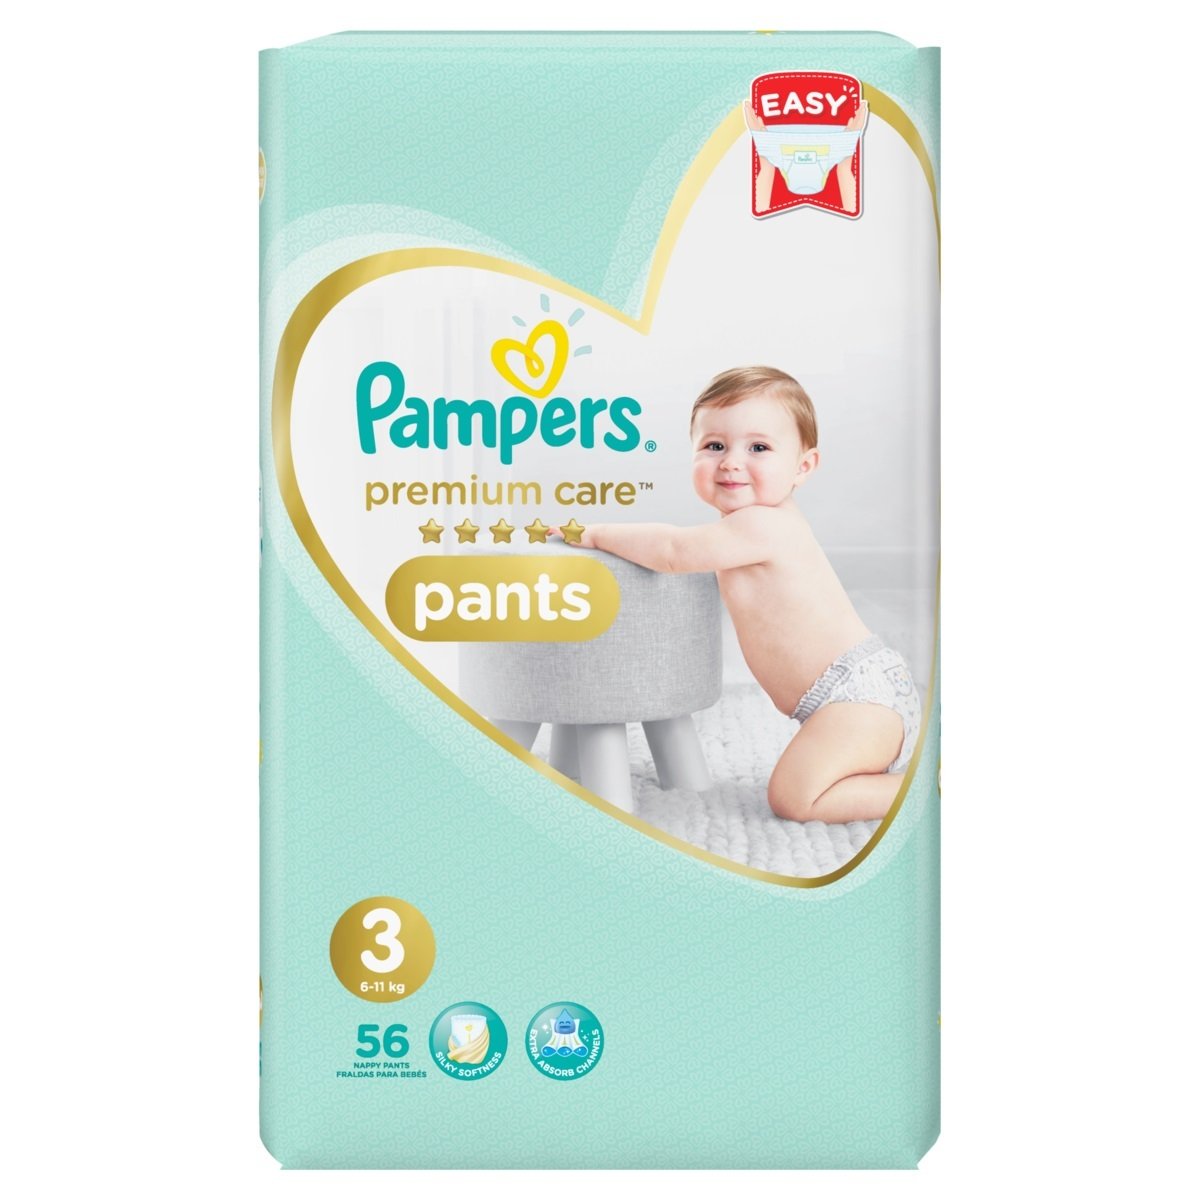 Pampers Premium Protection Size 6, 28 Nappies, 13kg+, Essential